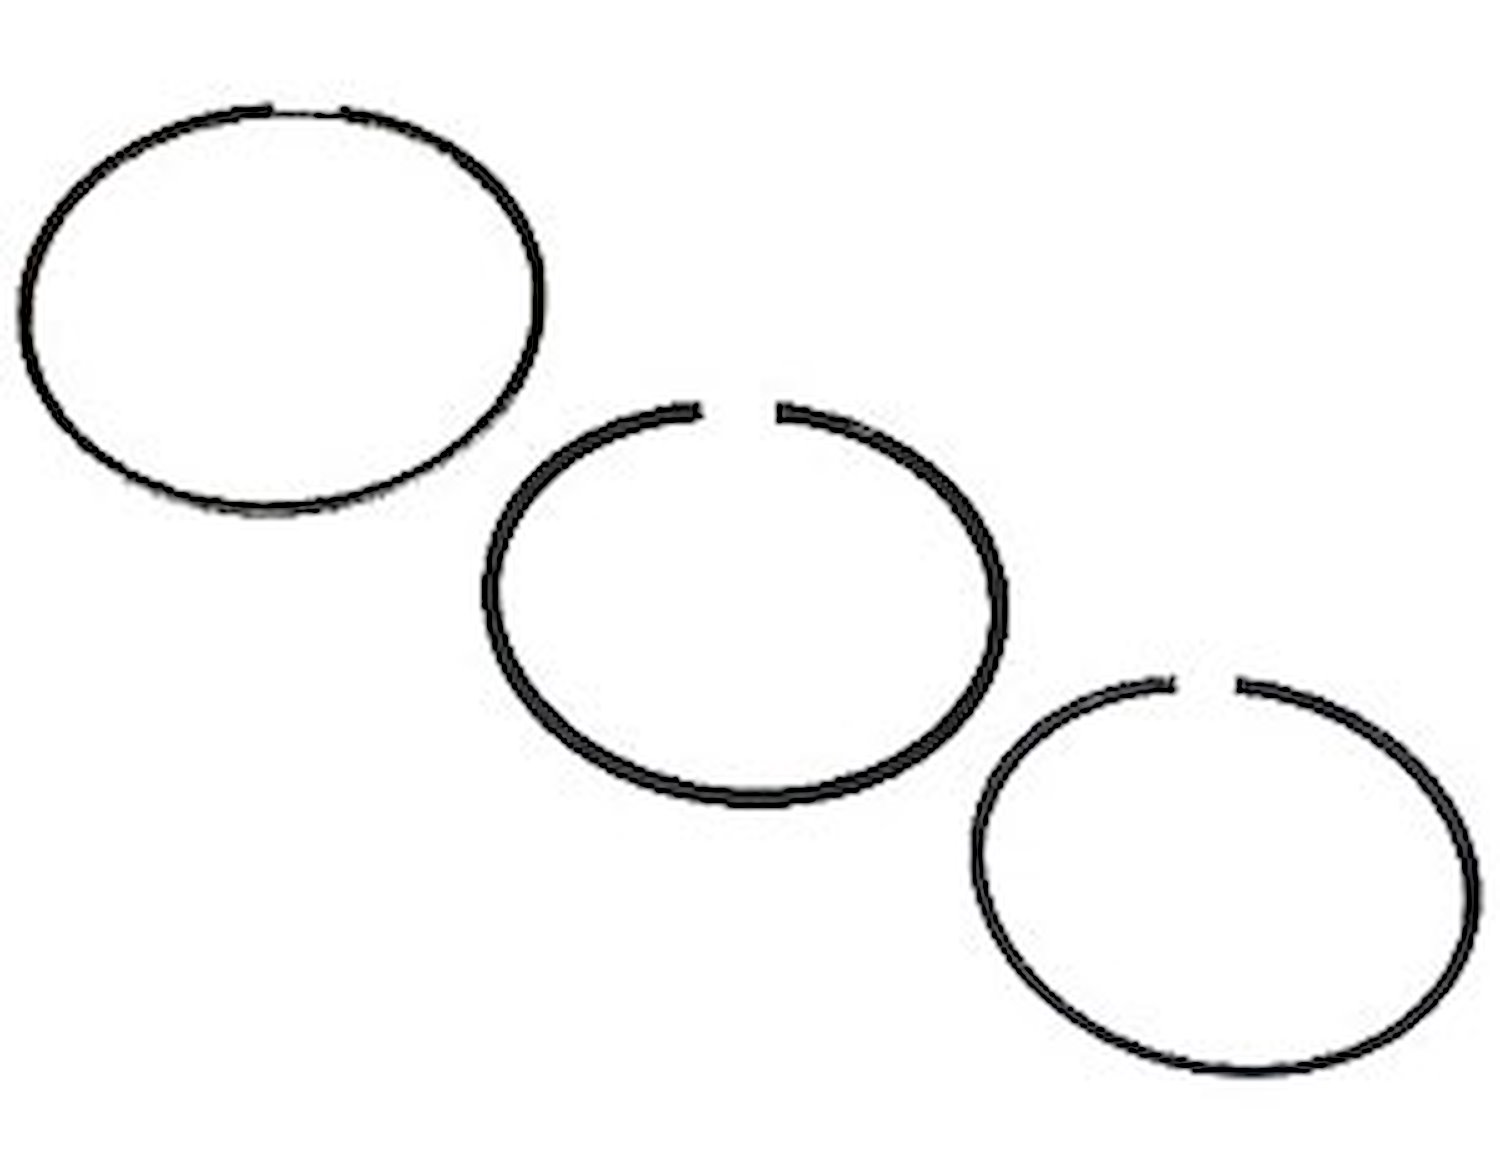 Standard Tension Single Cylinder Piston Ring Set Bore: 4.030"/File Fit: 4.035"